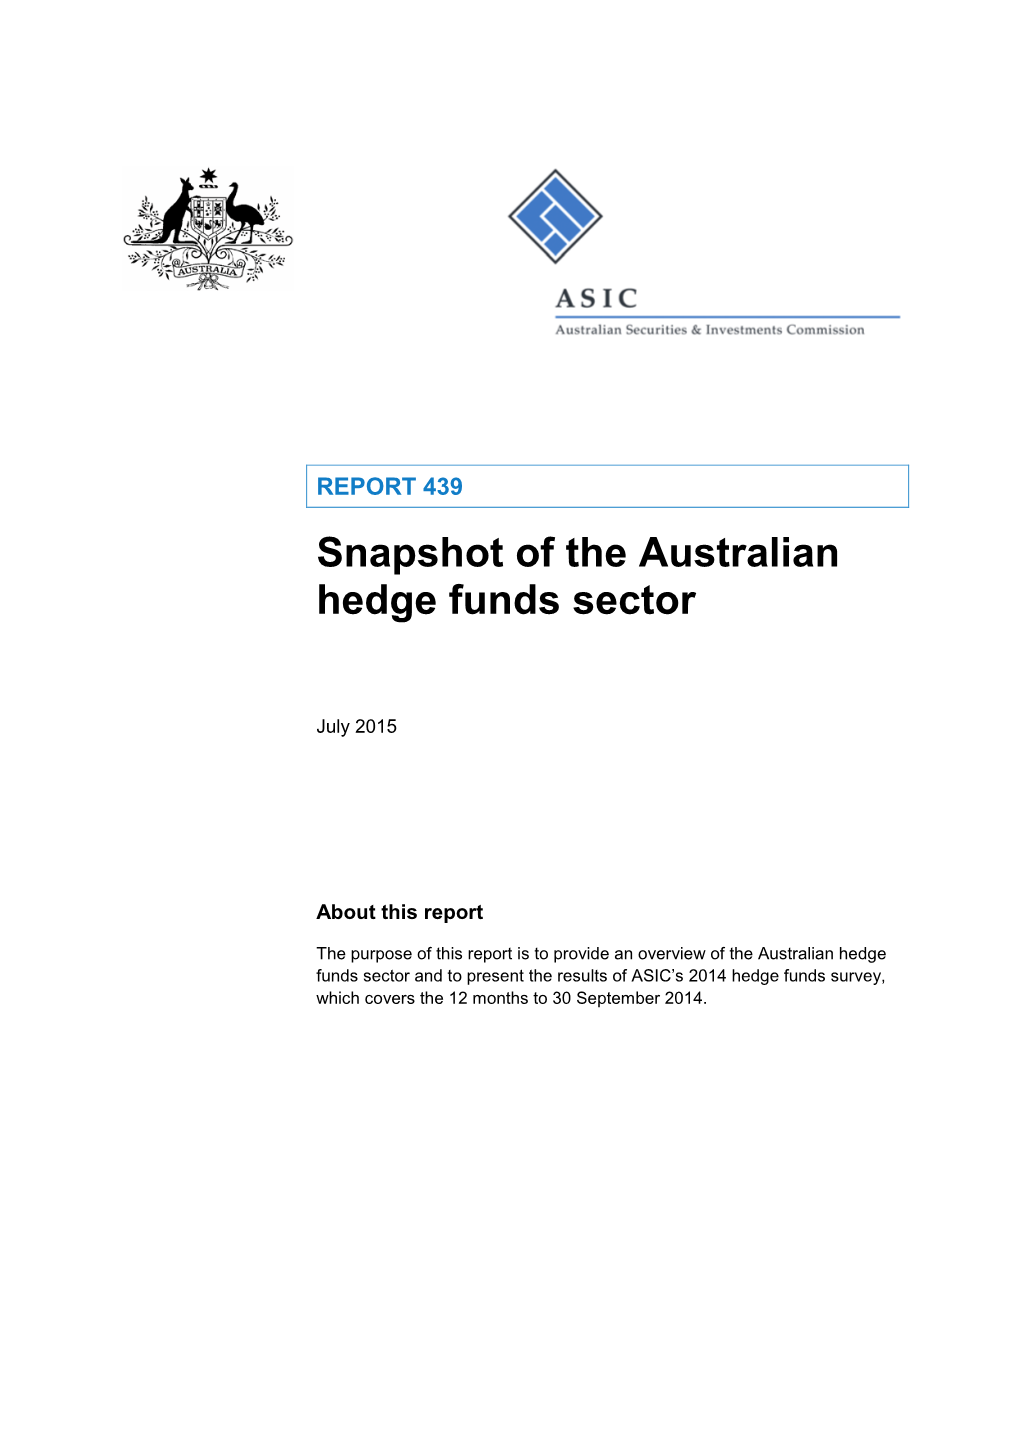 Report REP 439 Snapshot of the Australian Hedge Funds Sector